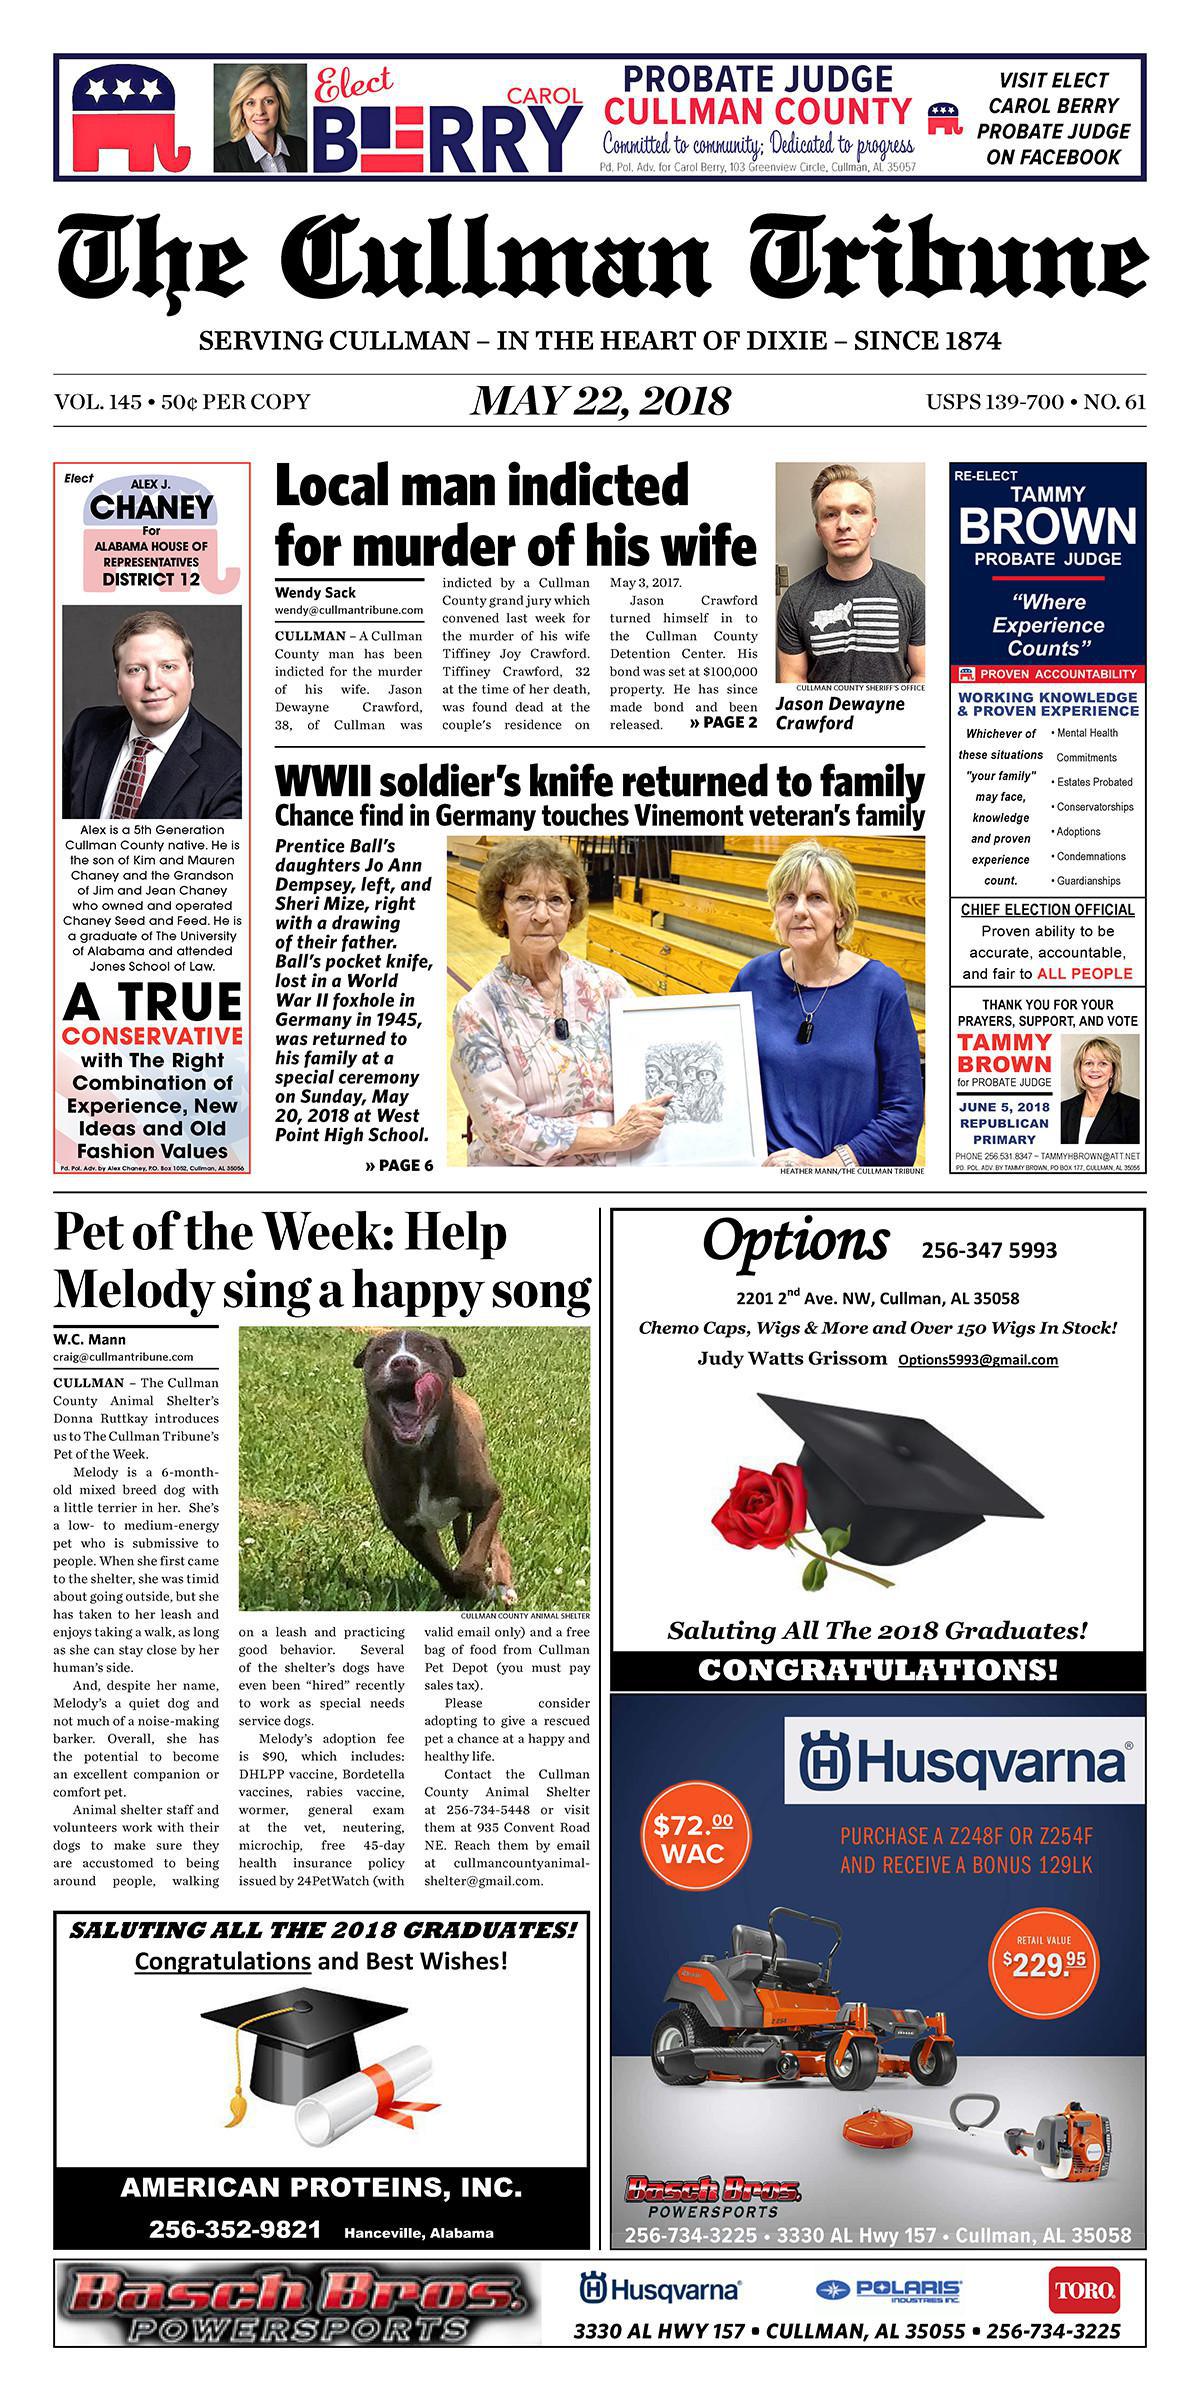 Good Morning Cullman! The 05-22-2018 edition of the Cullman Tribune is now ready to view